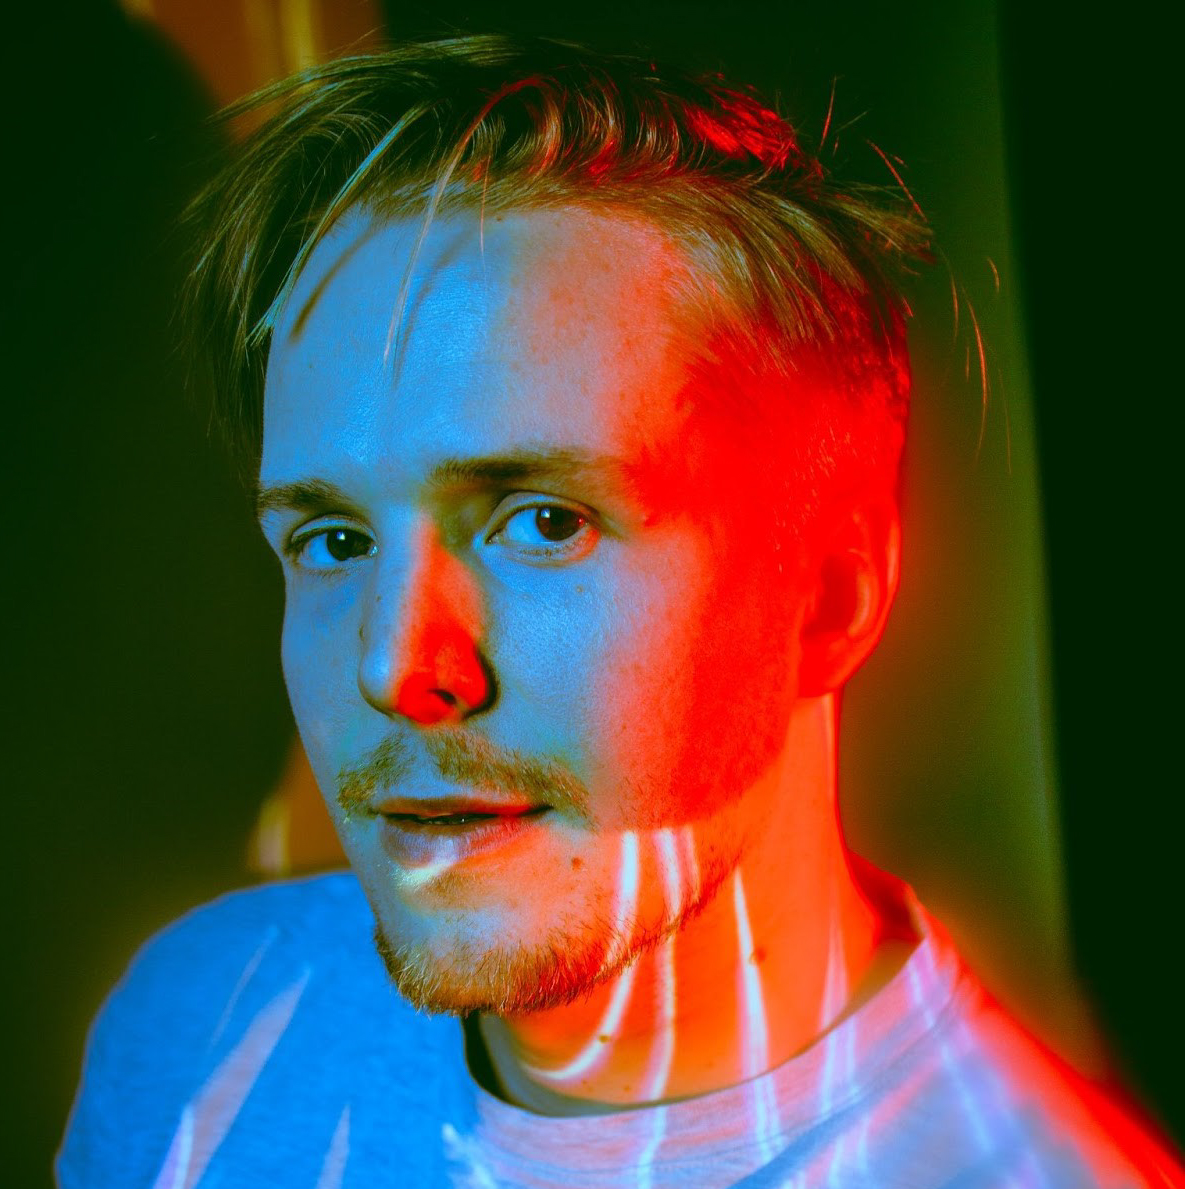 INTERVIEW: Talking with Finnish Producer/DJ RONY REX about his avant-garde EP, Night Time CV 